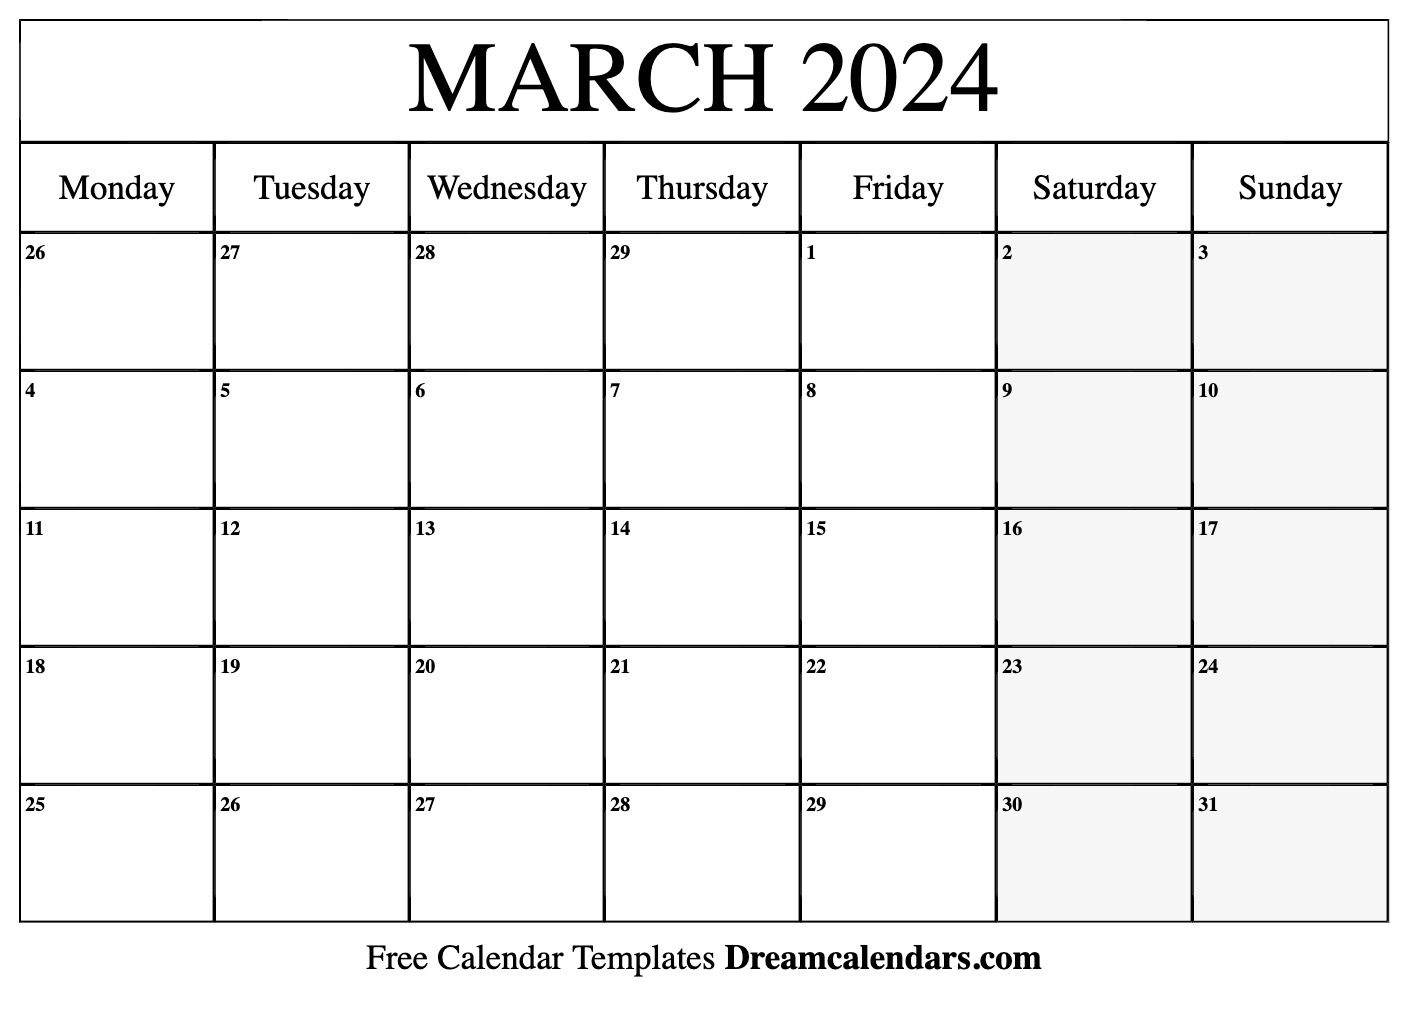 March 2024 Calendar | Free Blank Printable With Holidays | Printable Calendar 2024 March